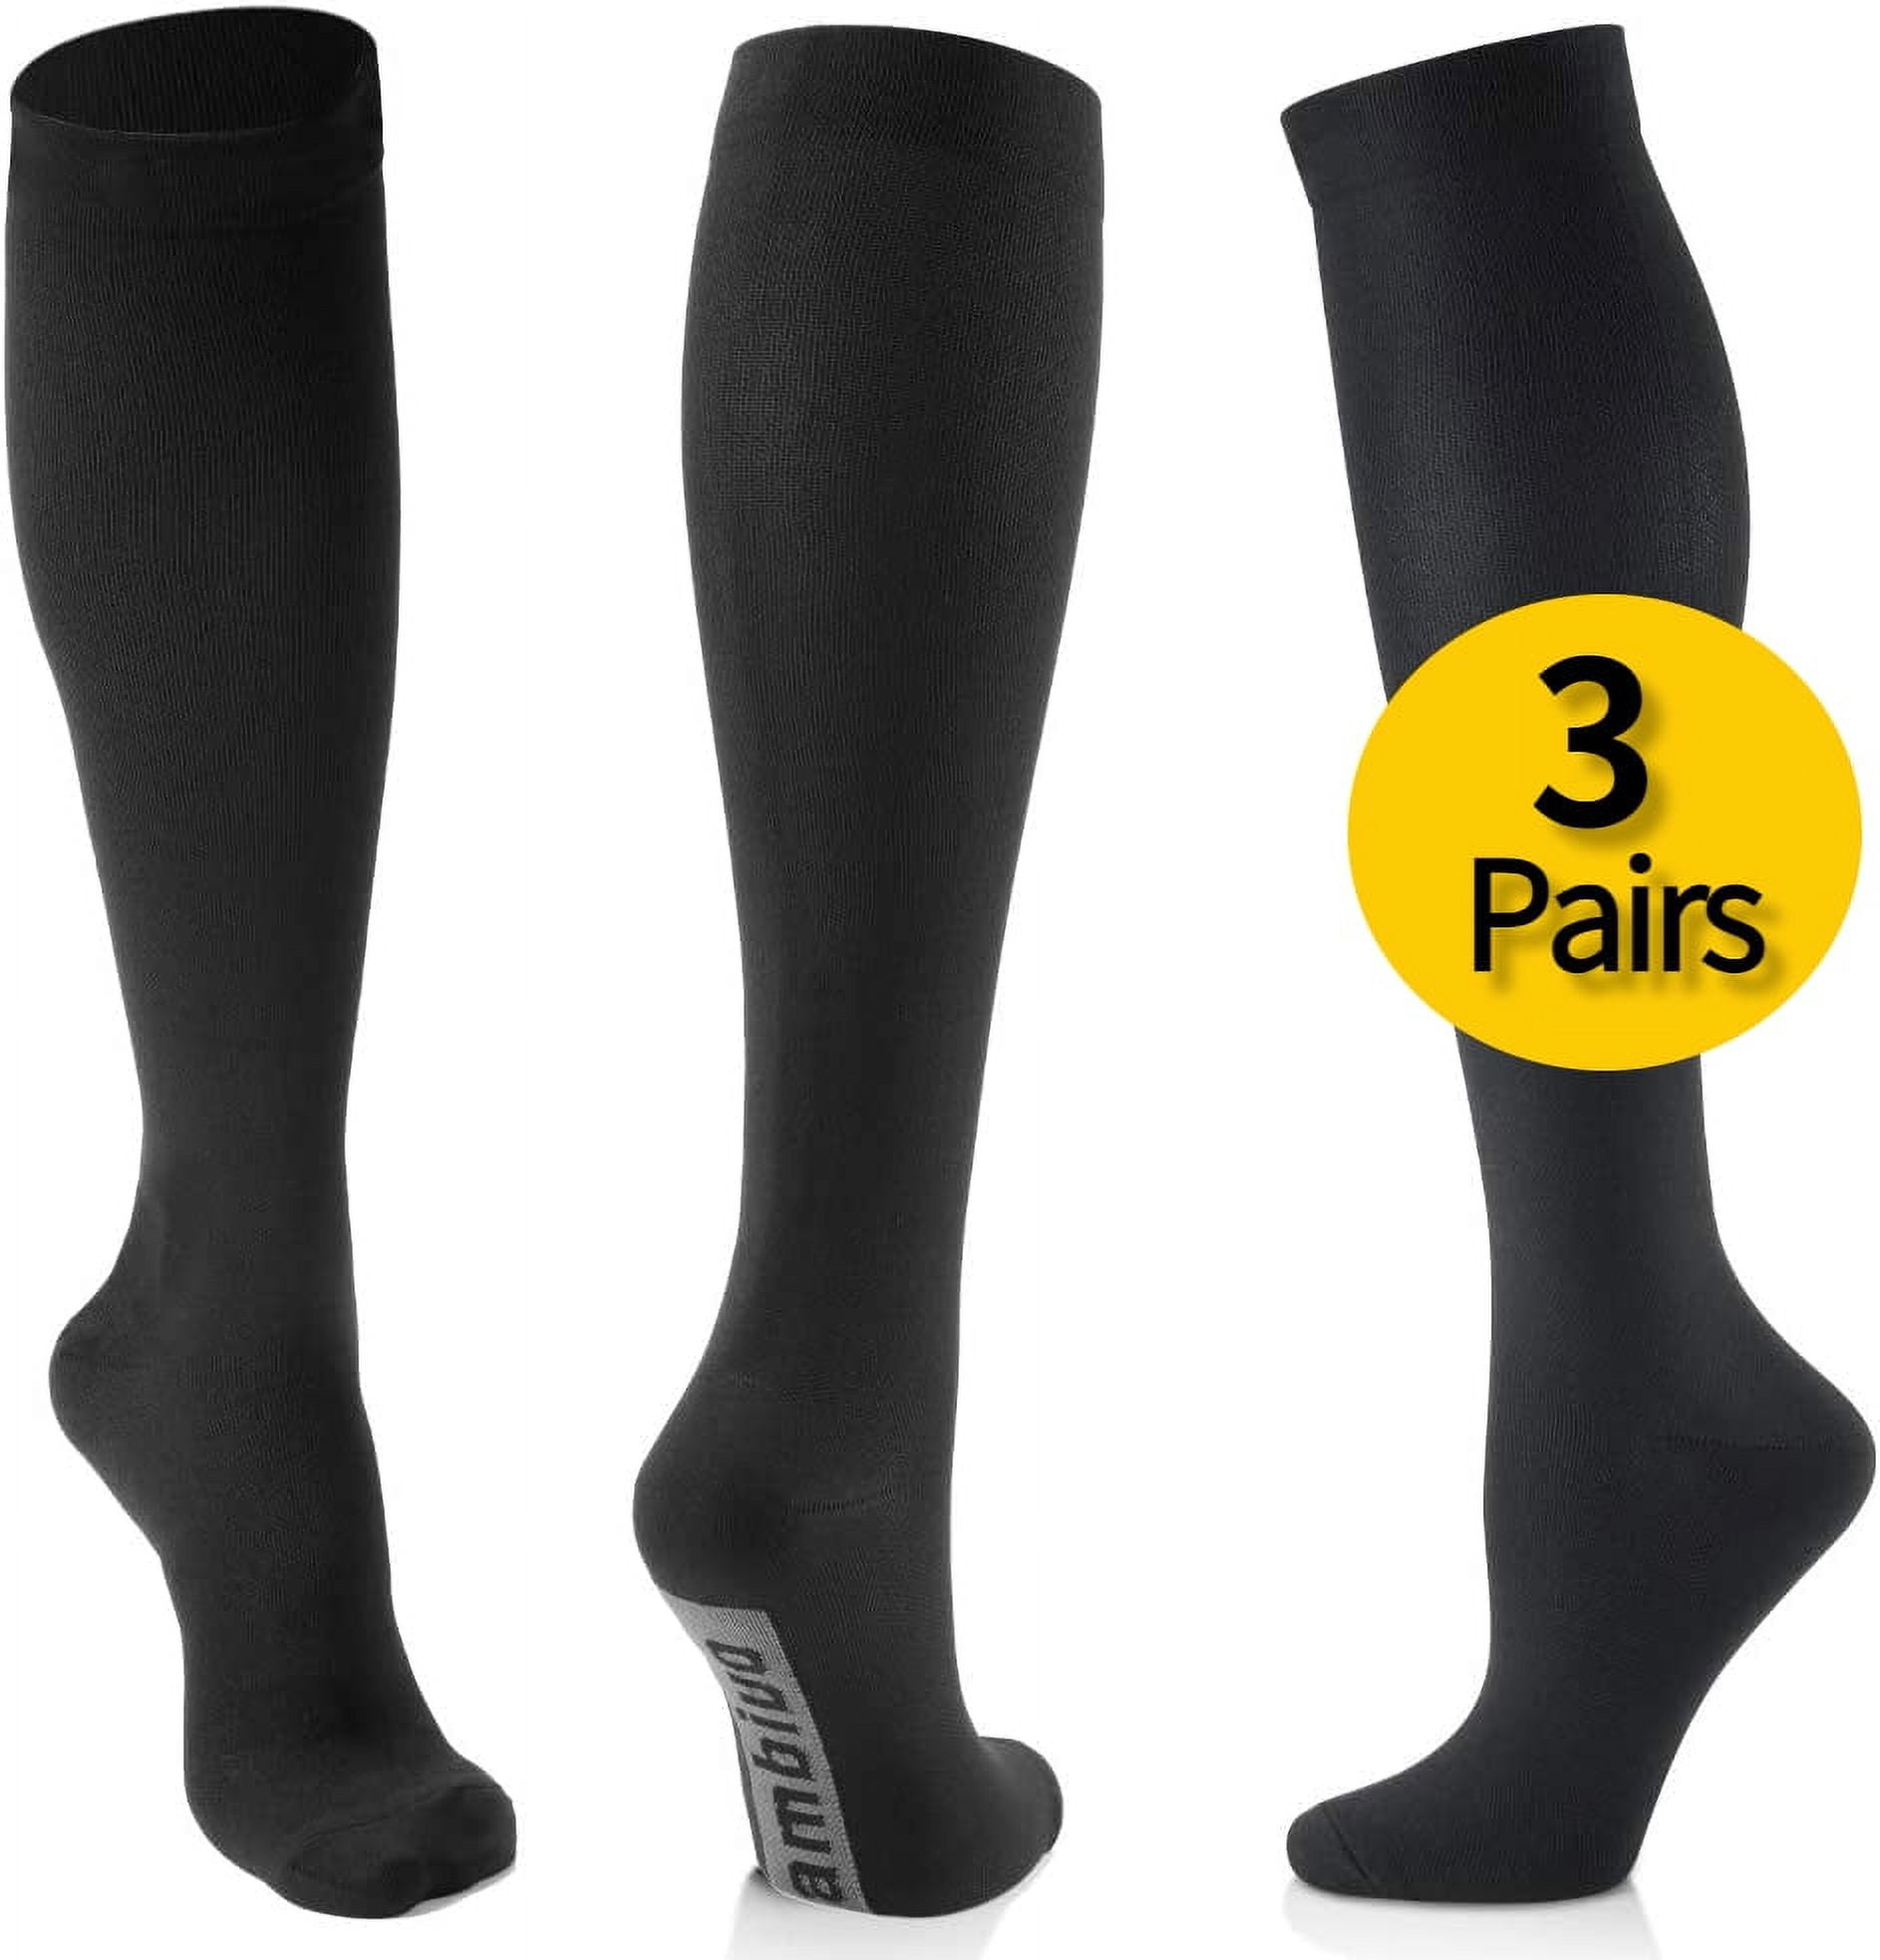 Cambivo Compression Socks for Women and Men 3 Pairs, 20-30mmHg Knee ...